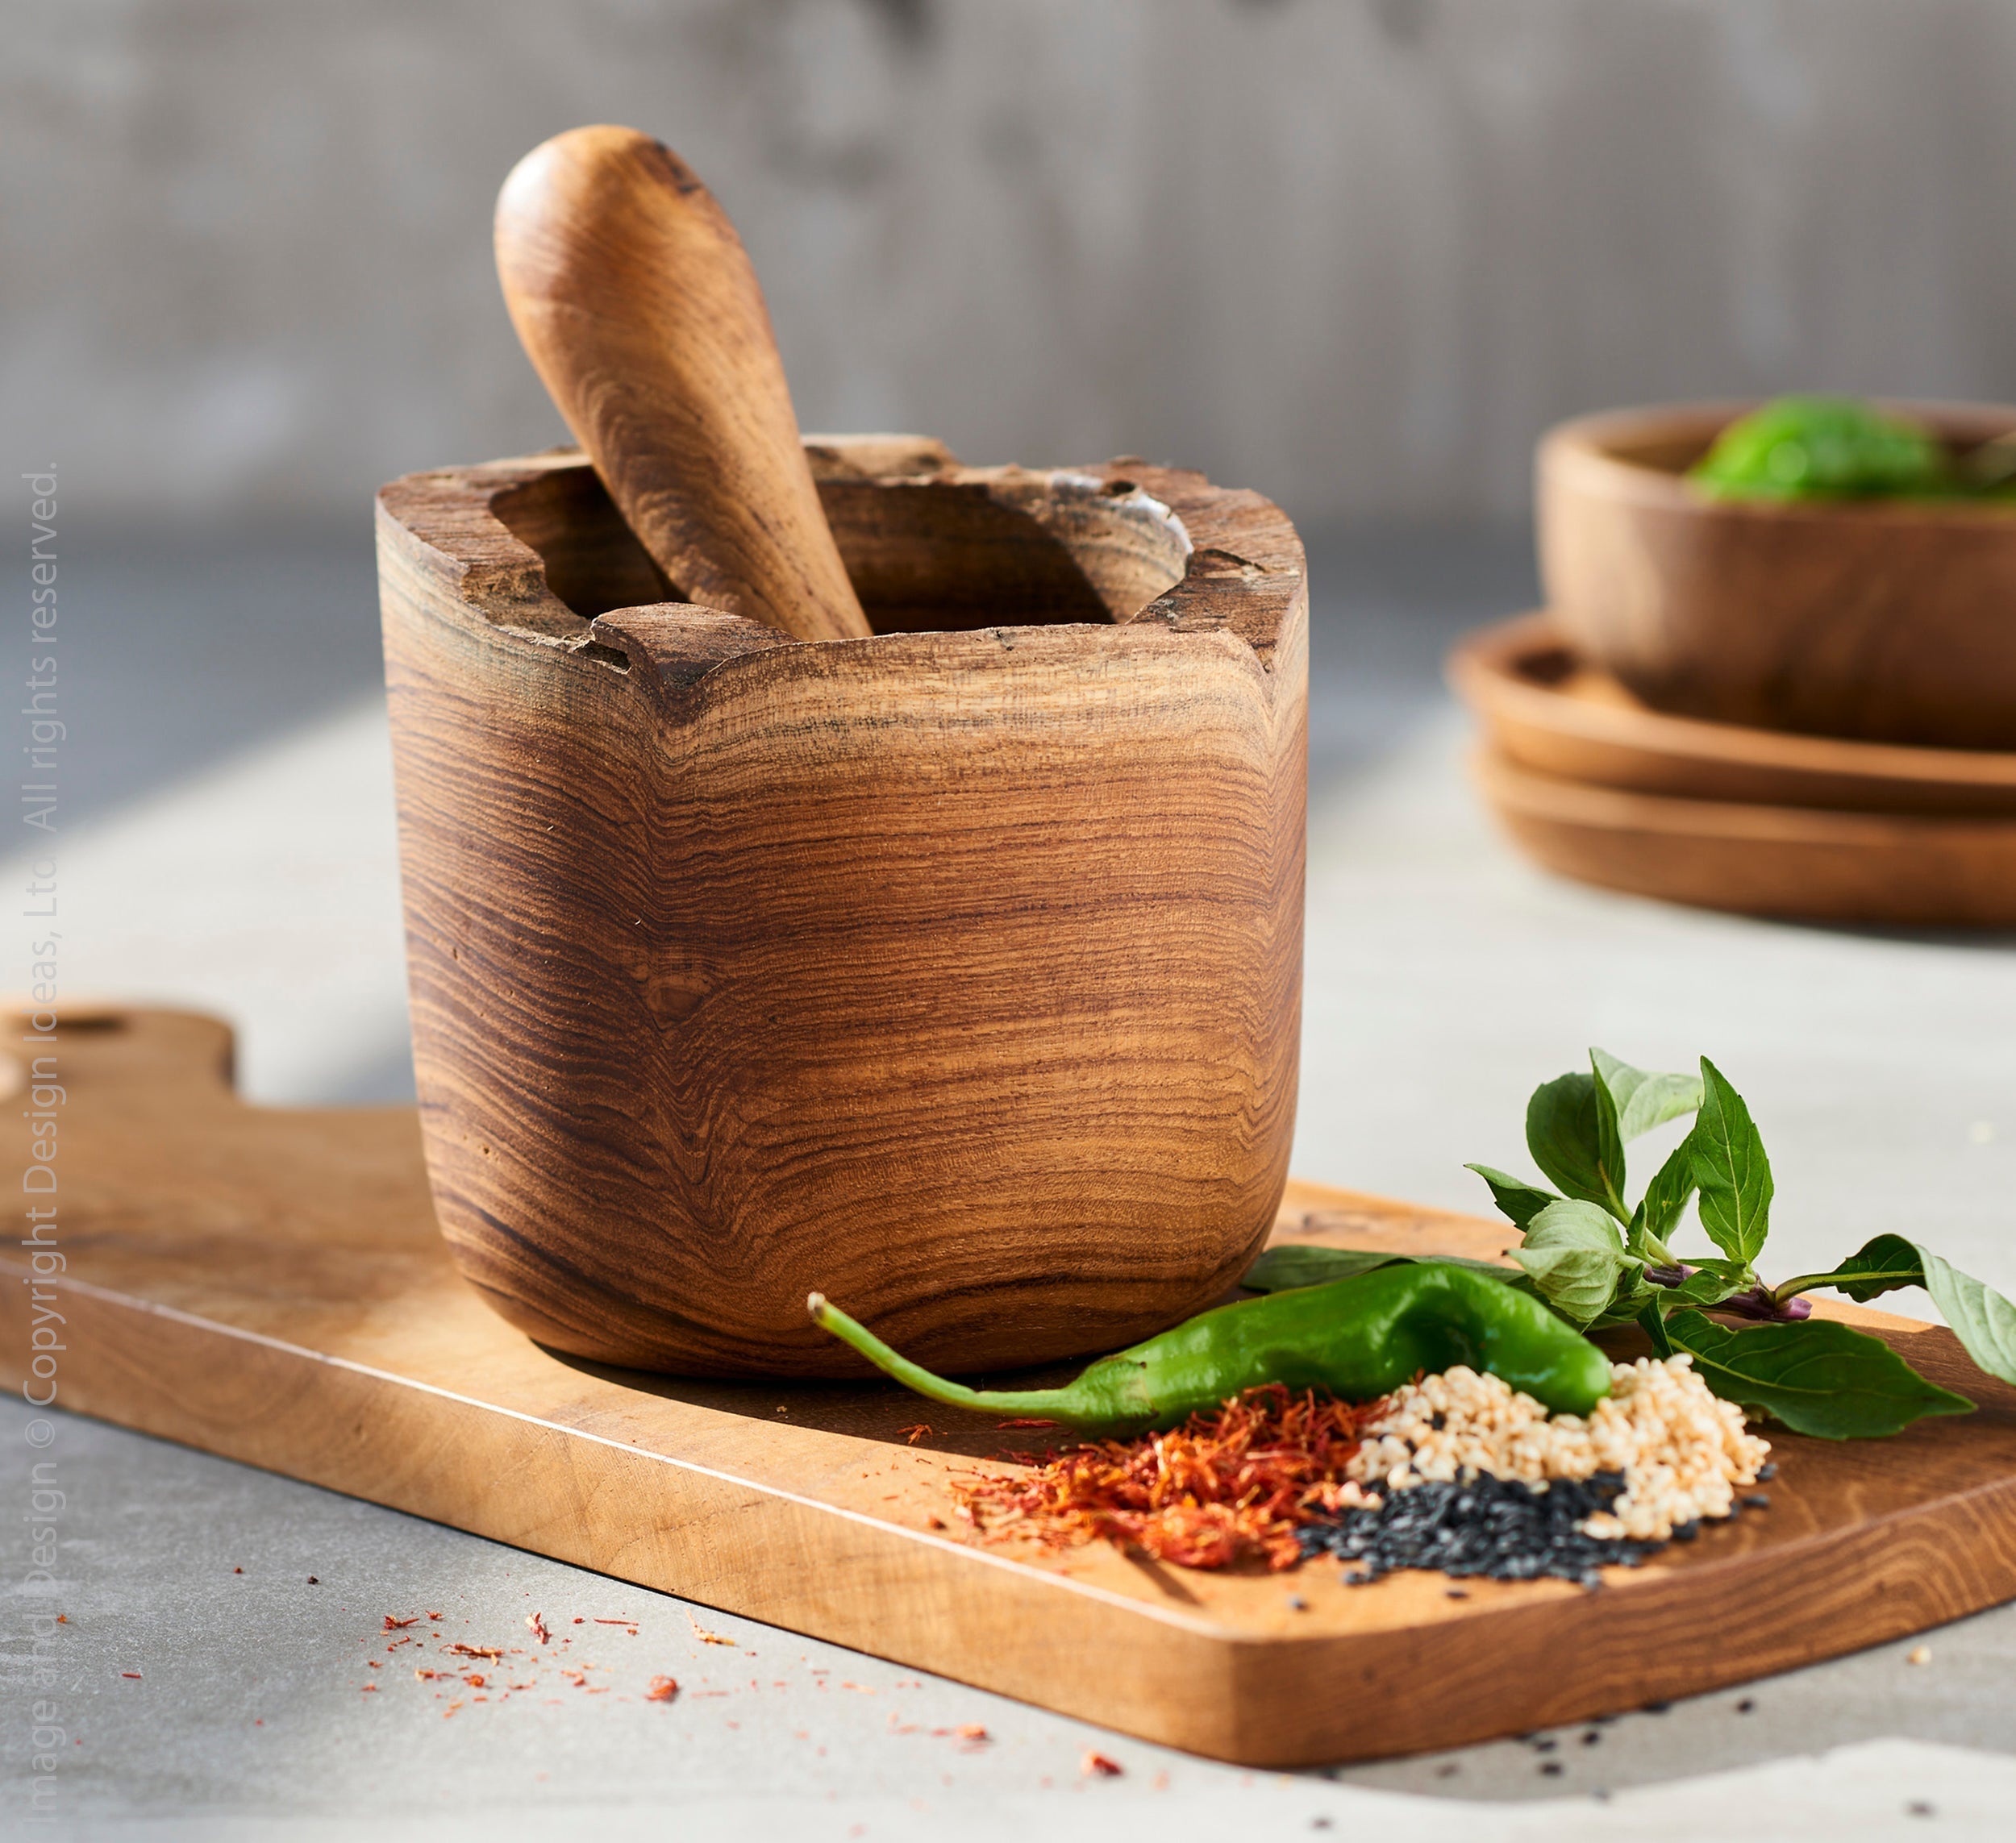 Takara Teak Root Mortar &amp; Pestle Black Color | Image 2 | From the Takara Collection | Elegantly handmade with natural teak root for long lasting use | This bowl is sustainably sourced | Available in natural color | texxture home